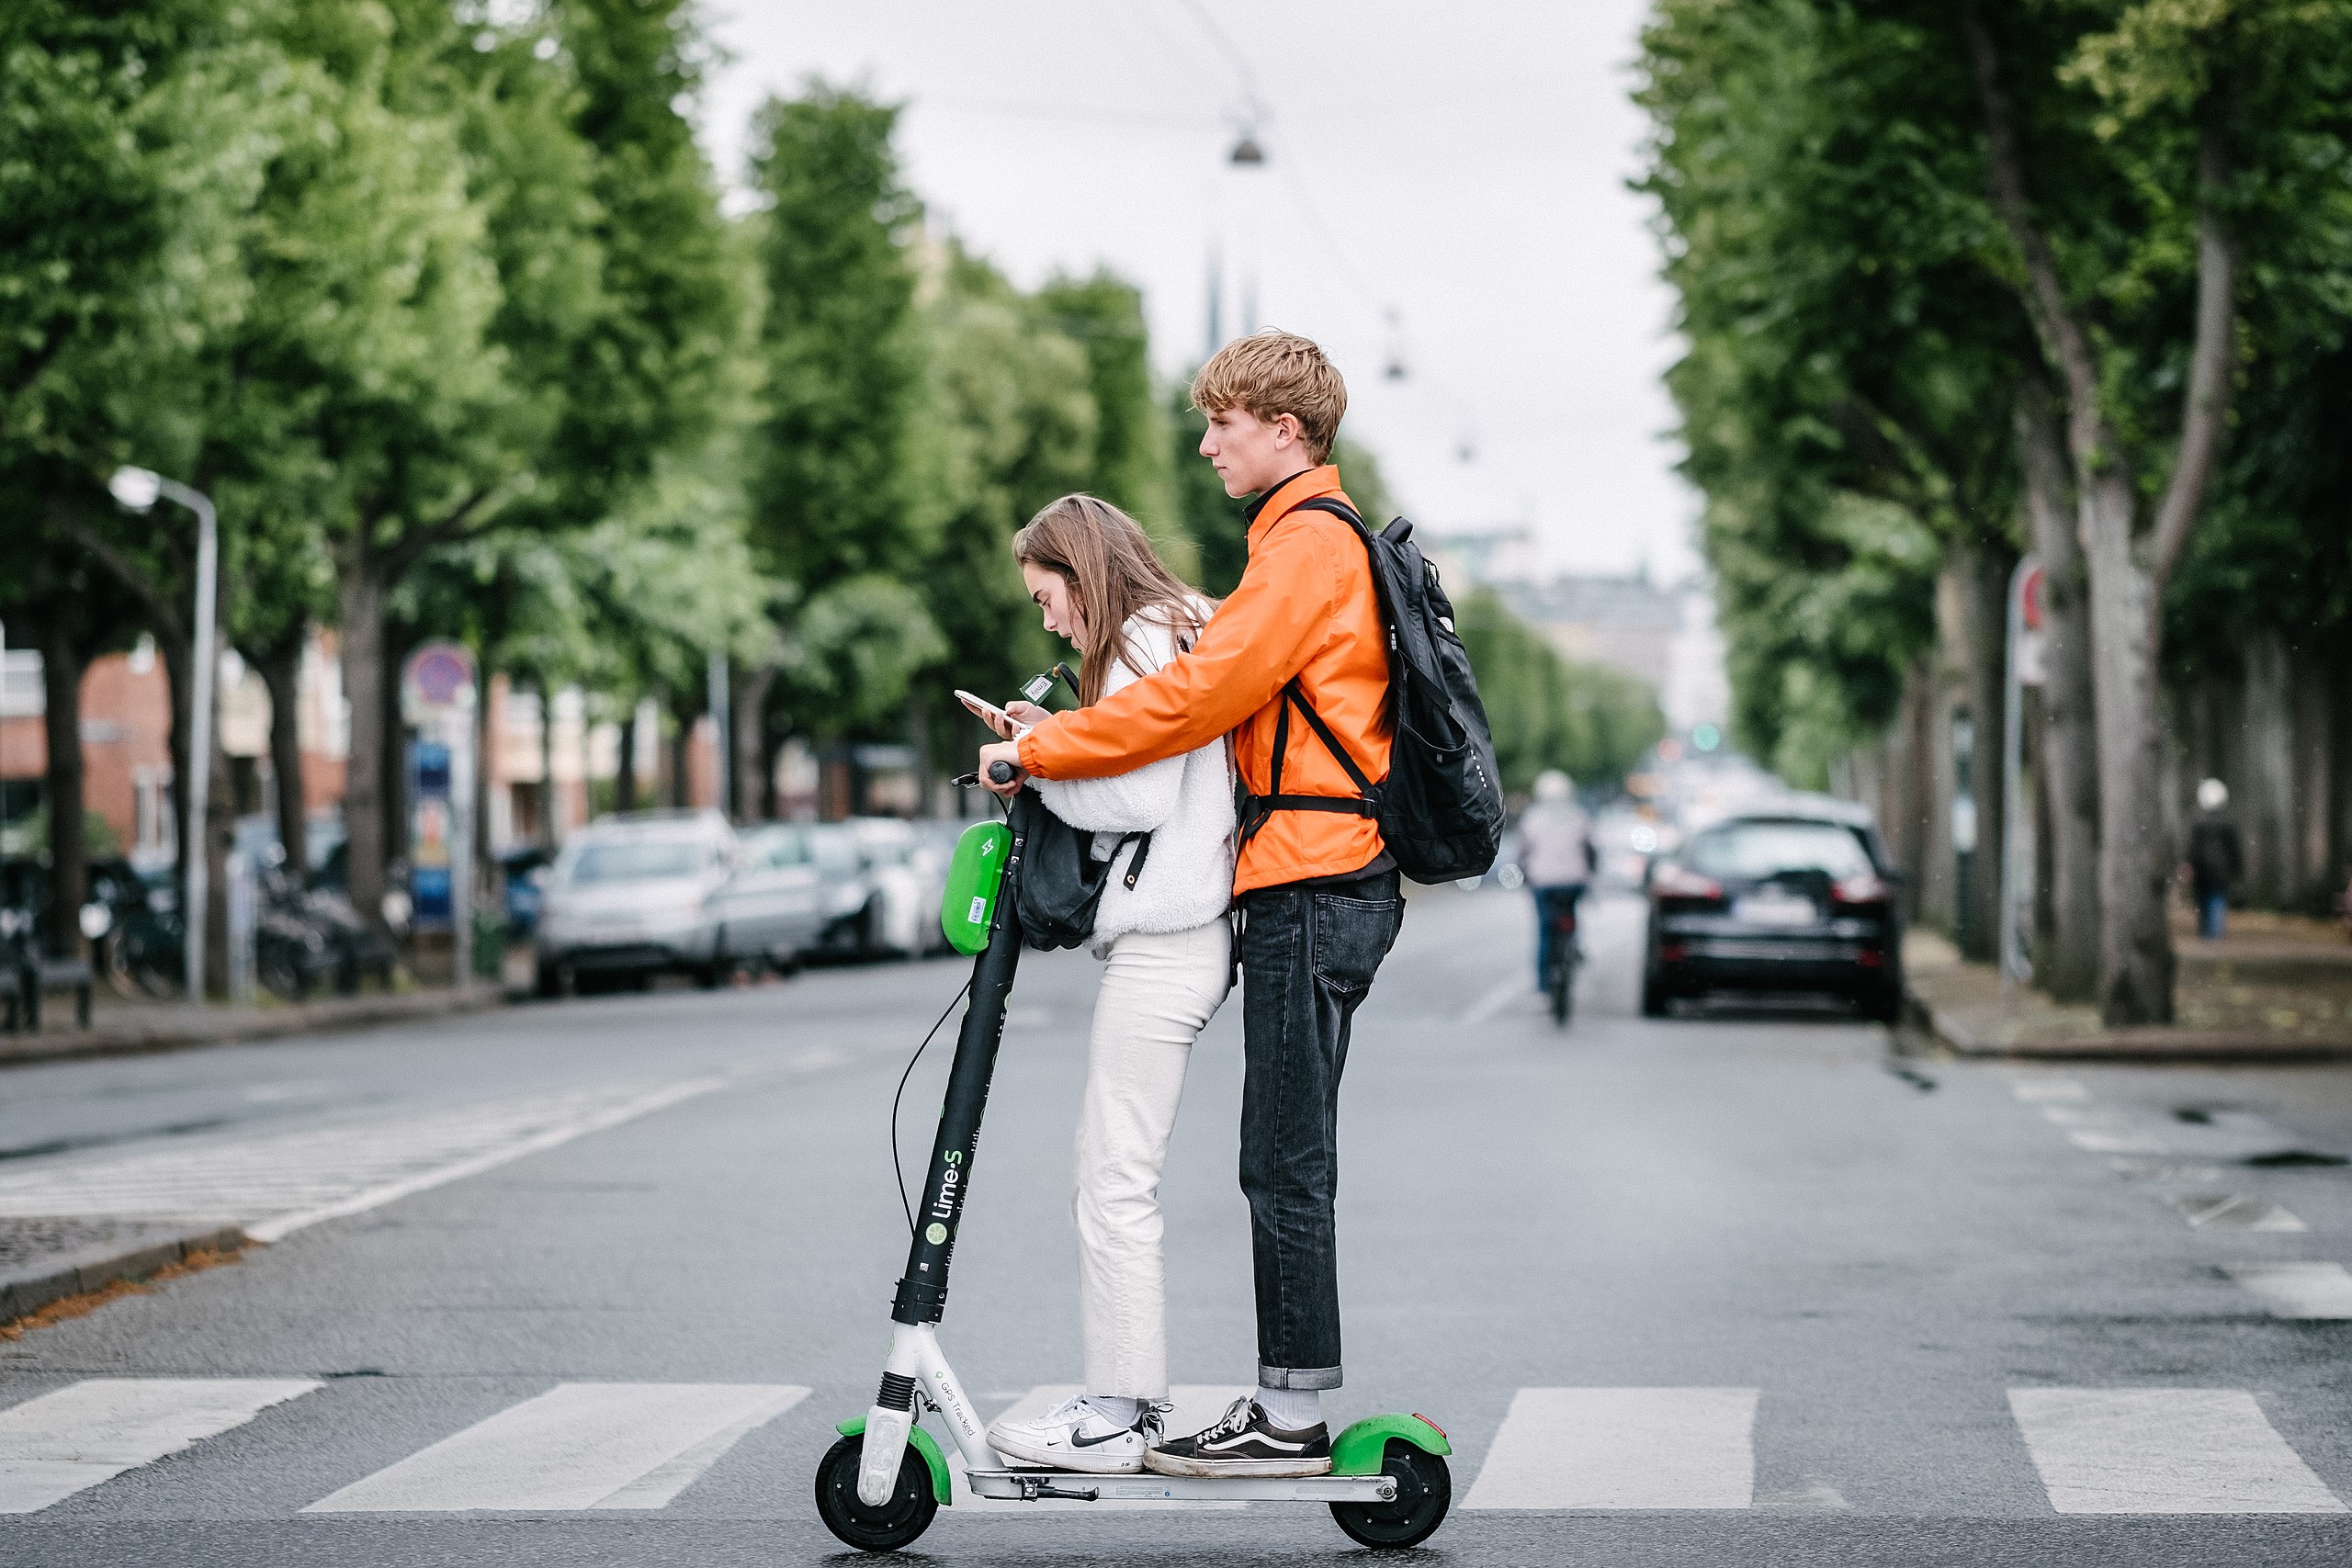 A man and woman riding a scooter